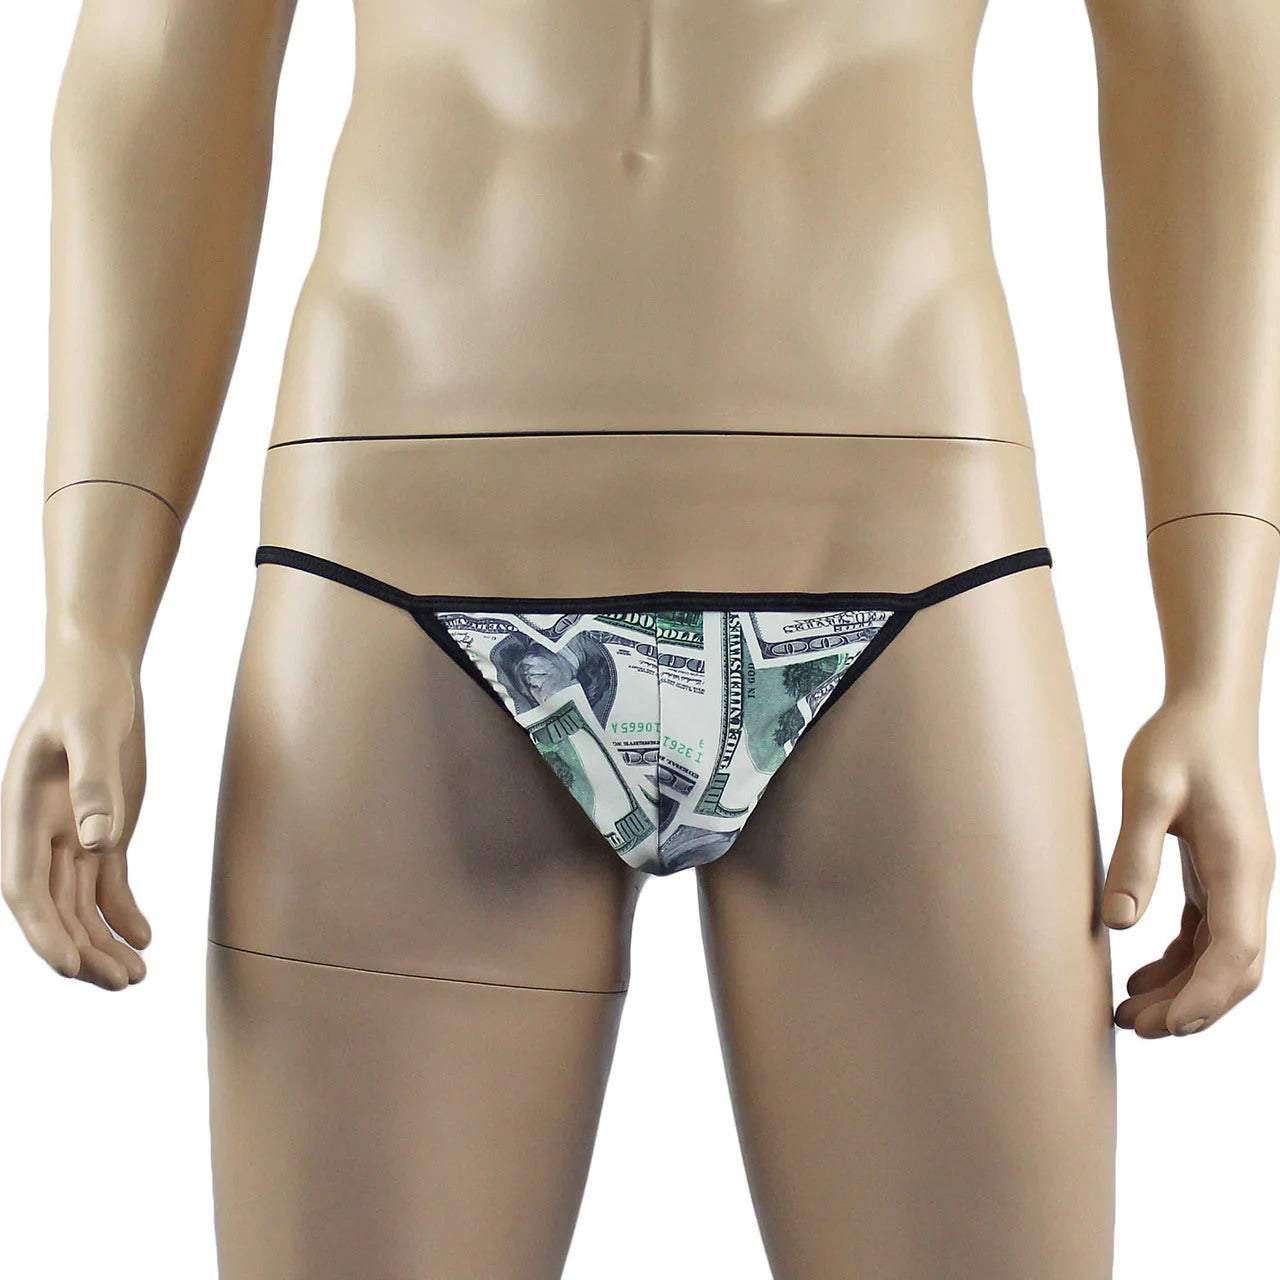 SALE - Mens US $100 Dollar Pouch G string